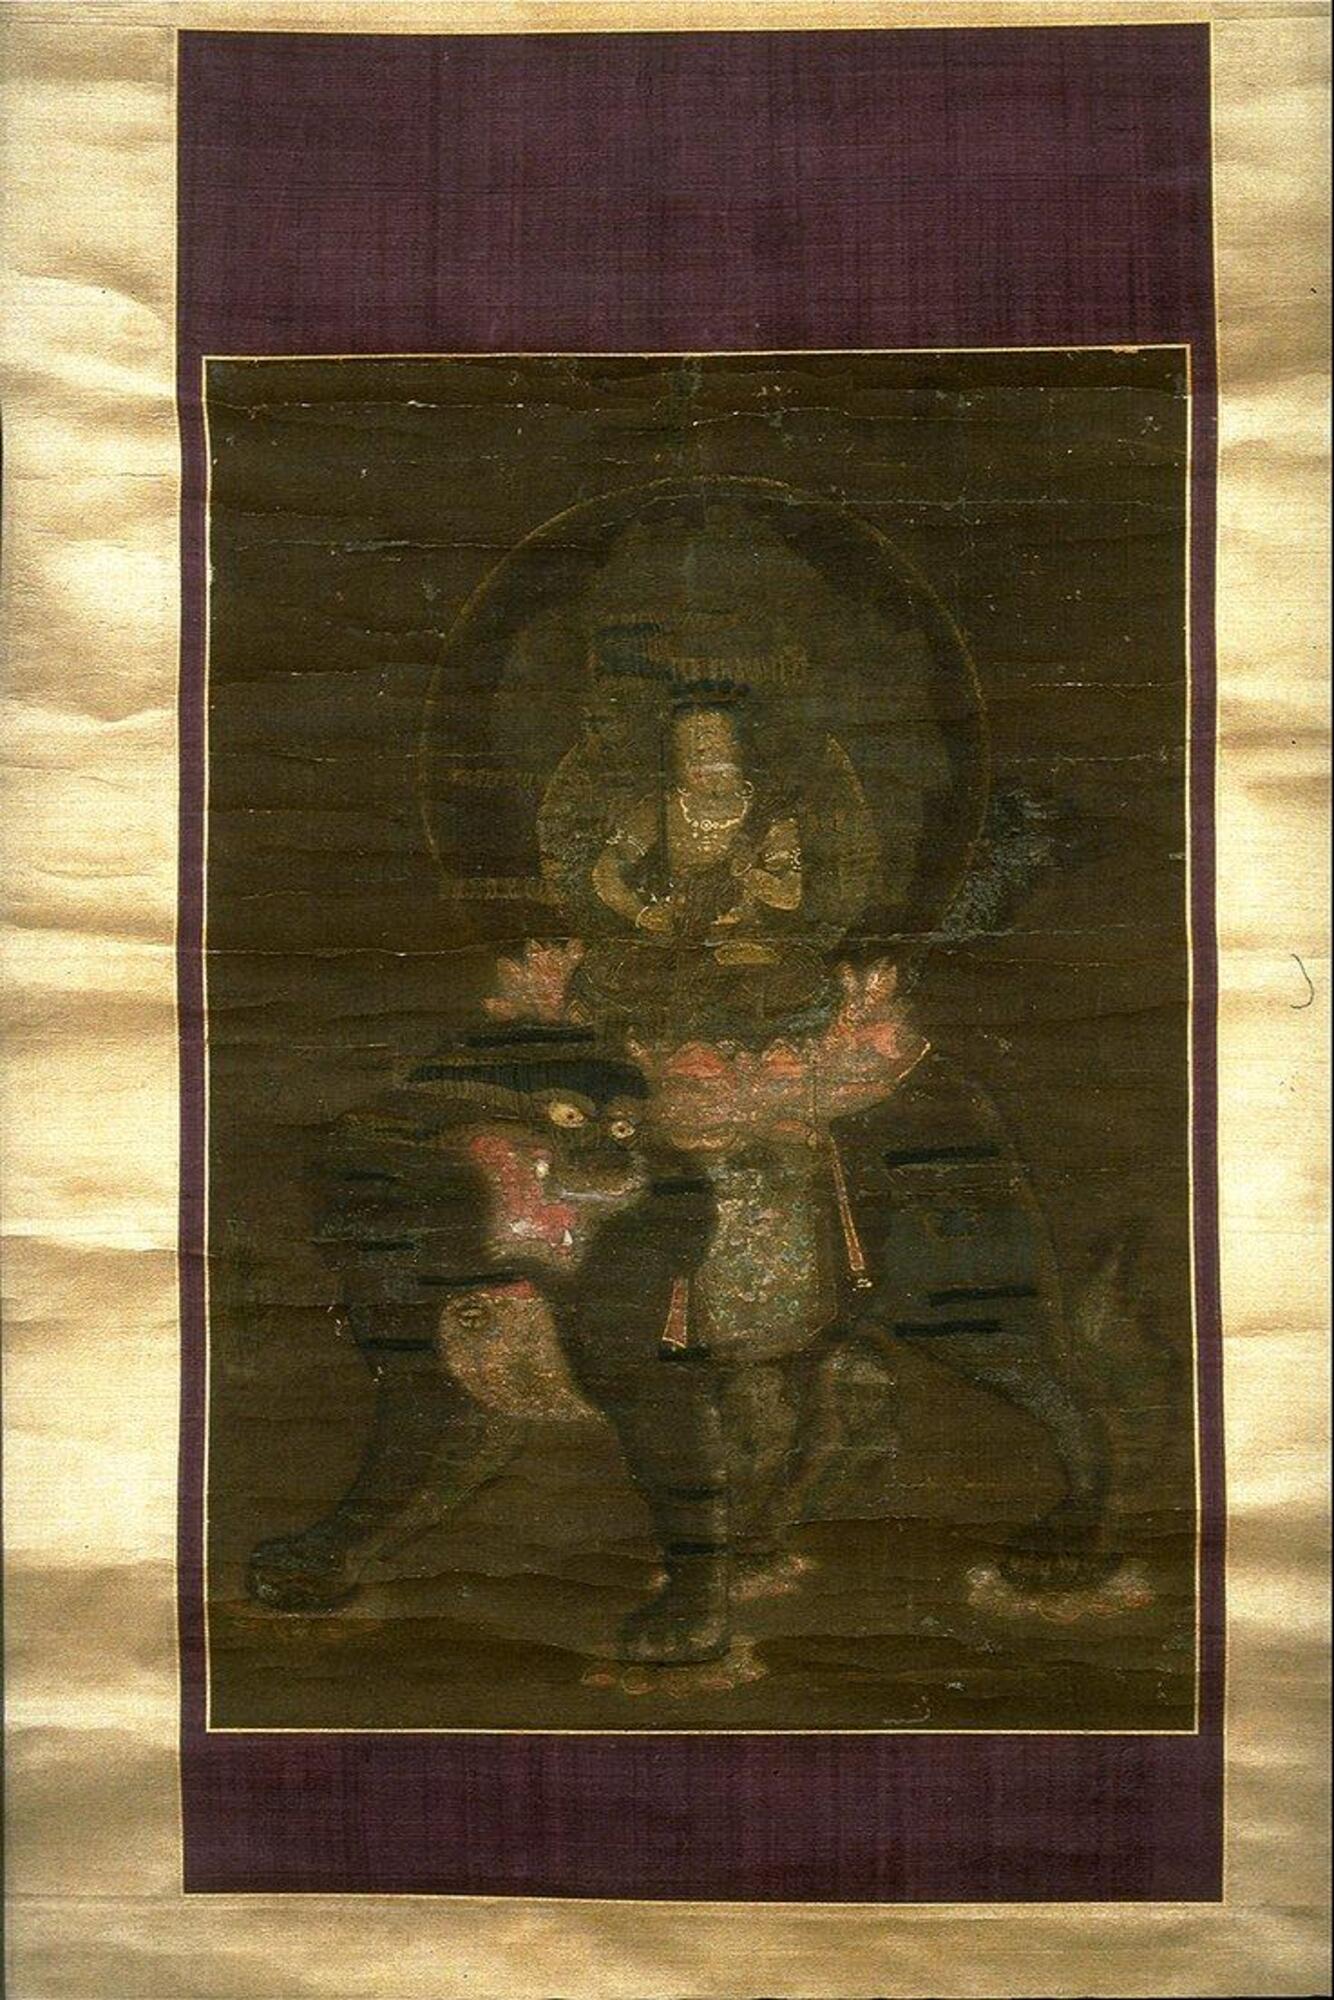 This icon painting depicts the bodhisattva Monju seated cross-legged on lotus on top of a lion. The figure holds a vajra sword, and is dressed in flowing robes with golden jewelry. Two circular mandorlas surround the figure. 